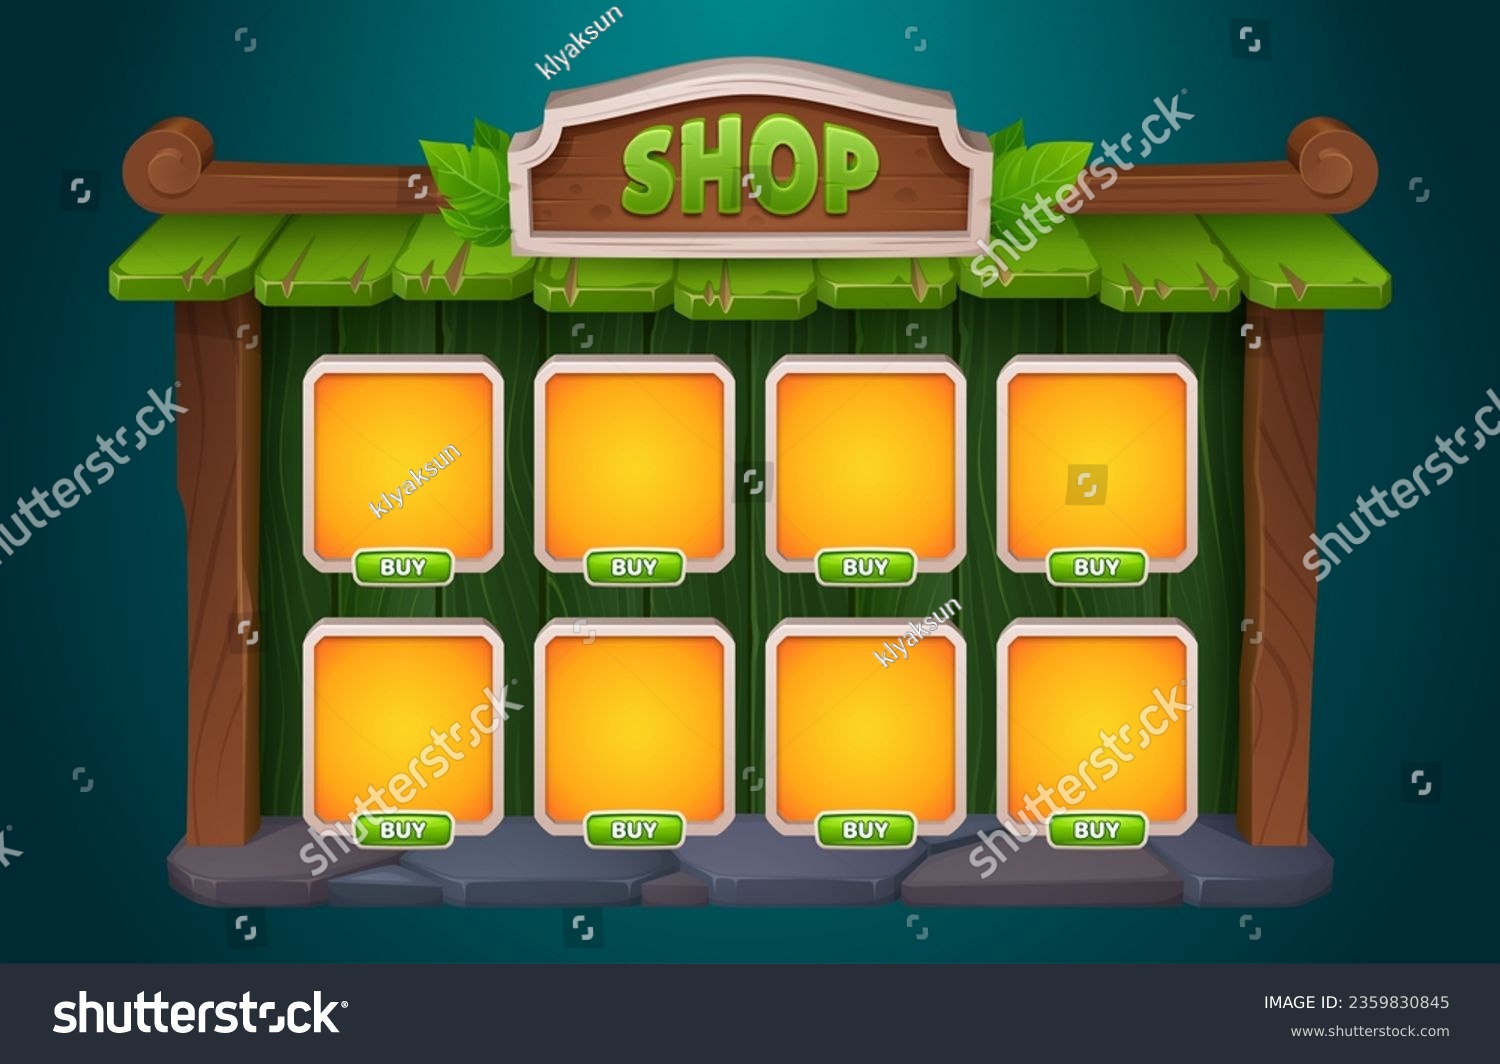 SVG of Shop game interface design - cartoon vector illustration wooden frame with card for item and button with price. User interface template for rpg store. Wood menu window for selling props and artifacts. svg